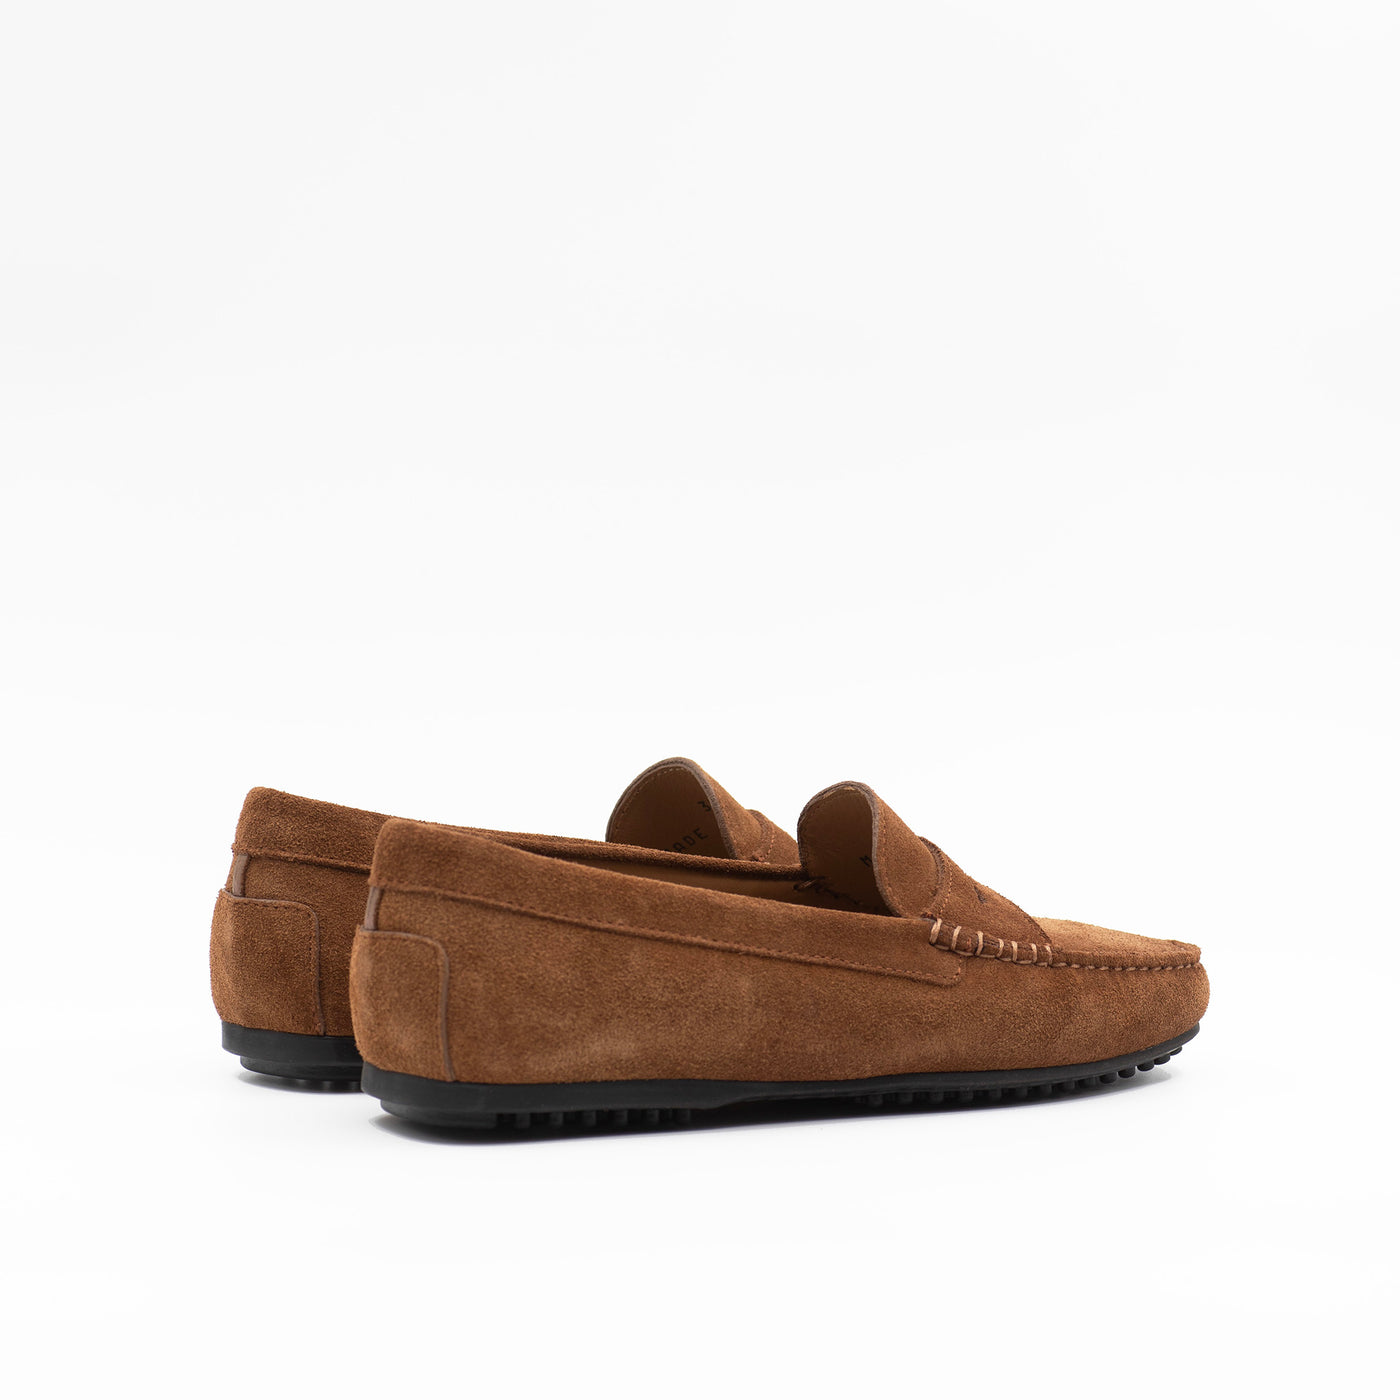 Driving shoes in brown suede